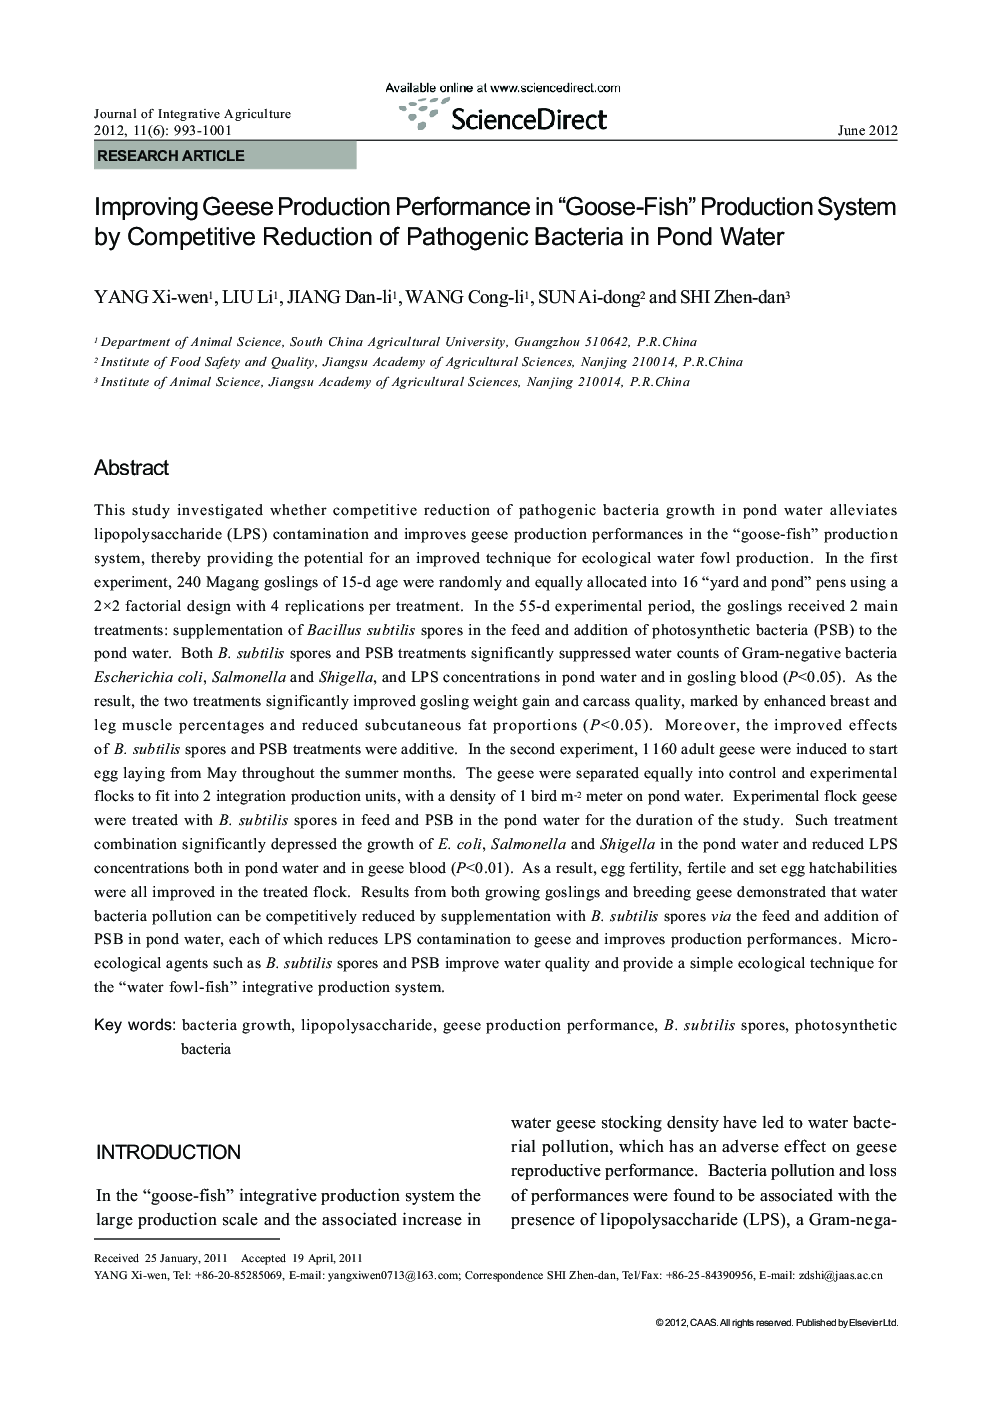 Improving Geese Production Performance in “Goose-Fish” Production System by Competitive Reduction of Pathogenic Bacteria in Pond Water